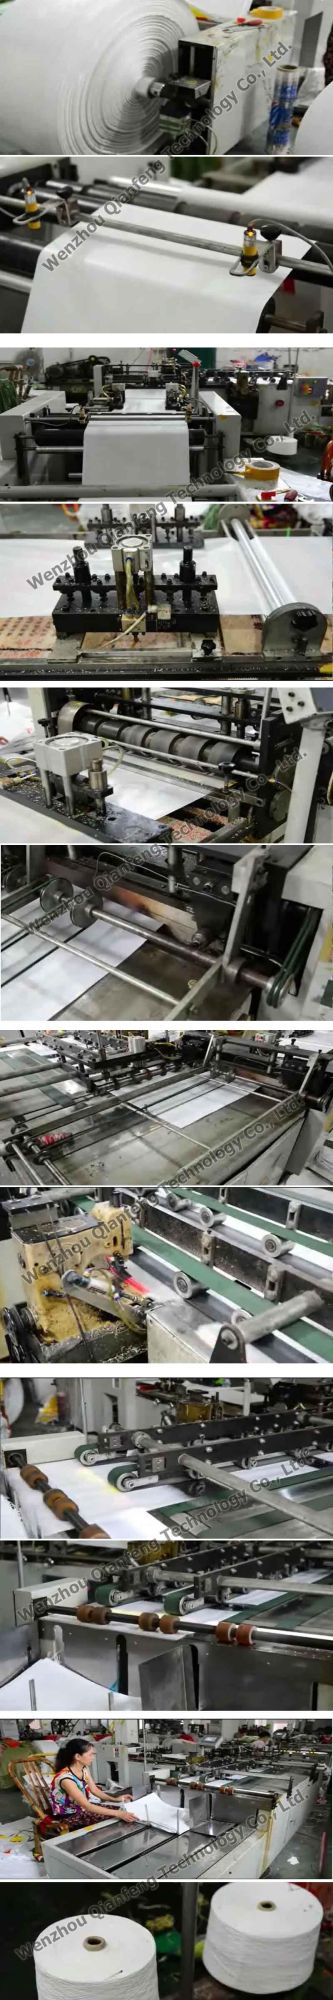 High Speed Cuttig and Sewing Machine for Printed Woven Bag